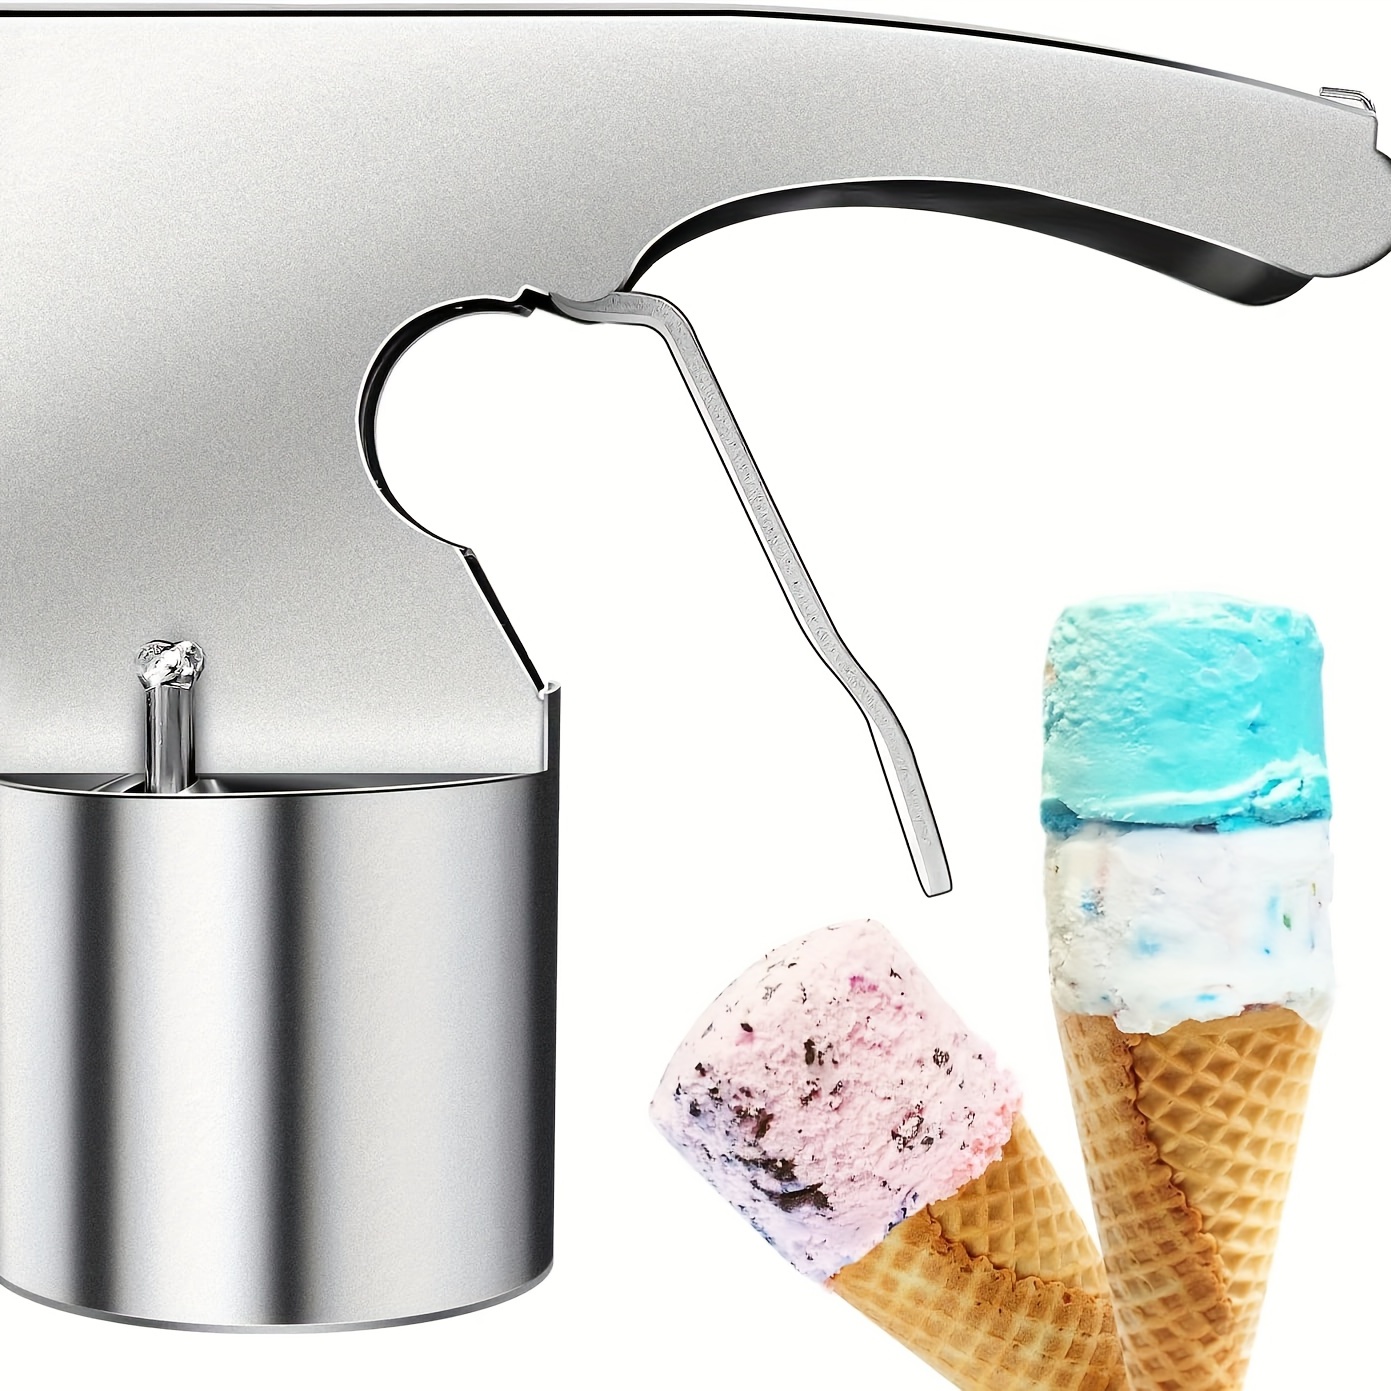 Thrifty Old Time Cylindrical Ice Cream Scooper